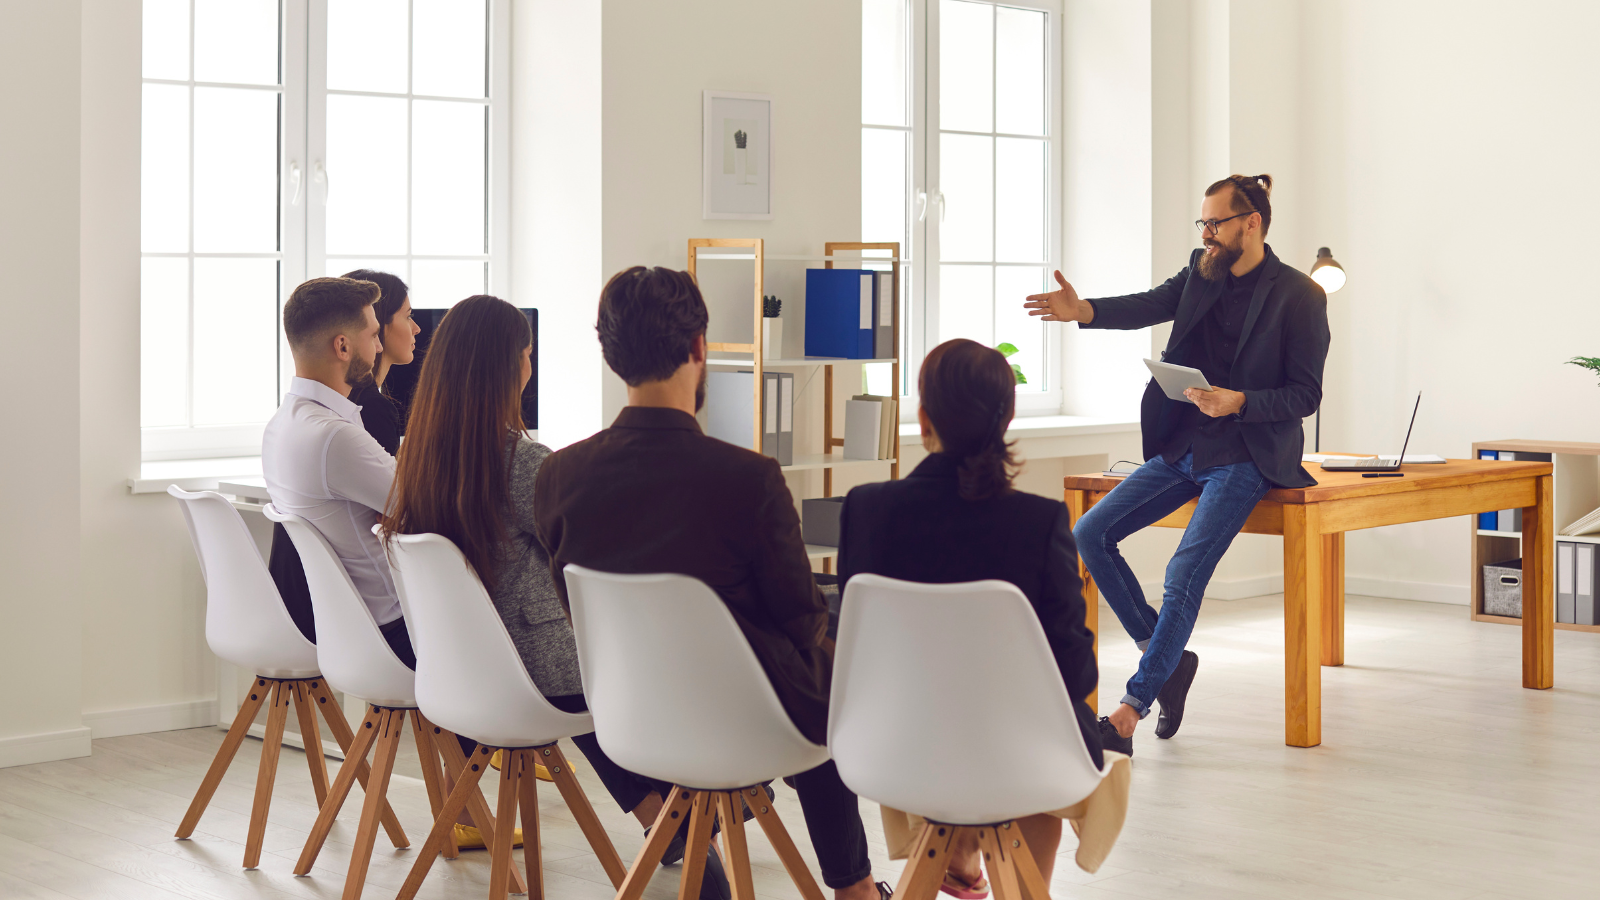 10 Questions Sales Managers Should Ask About Their Sales Culture